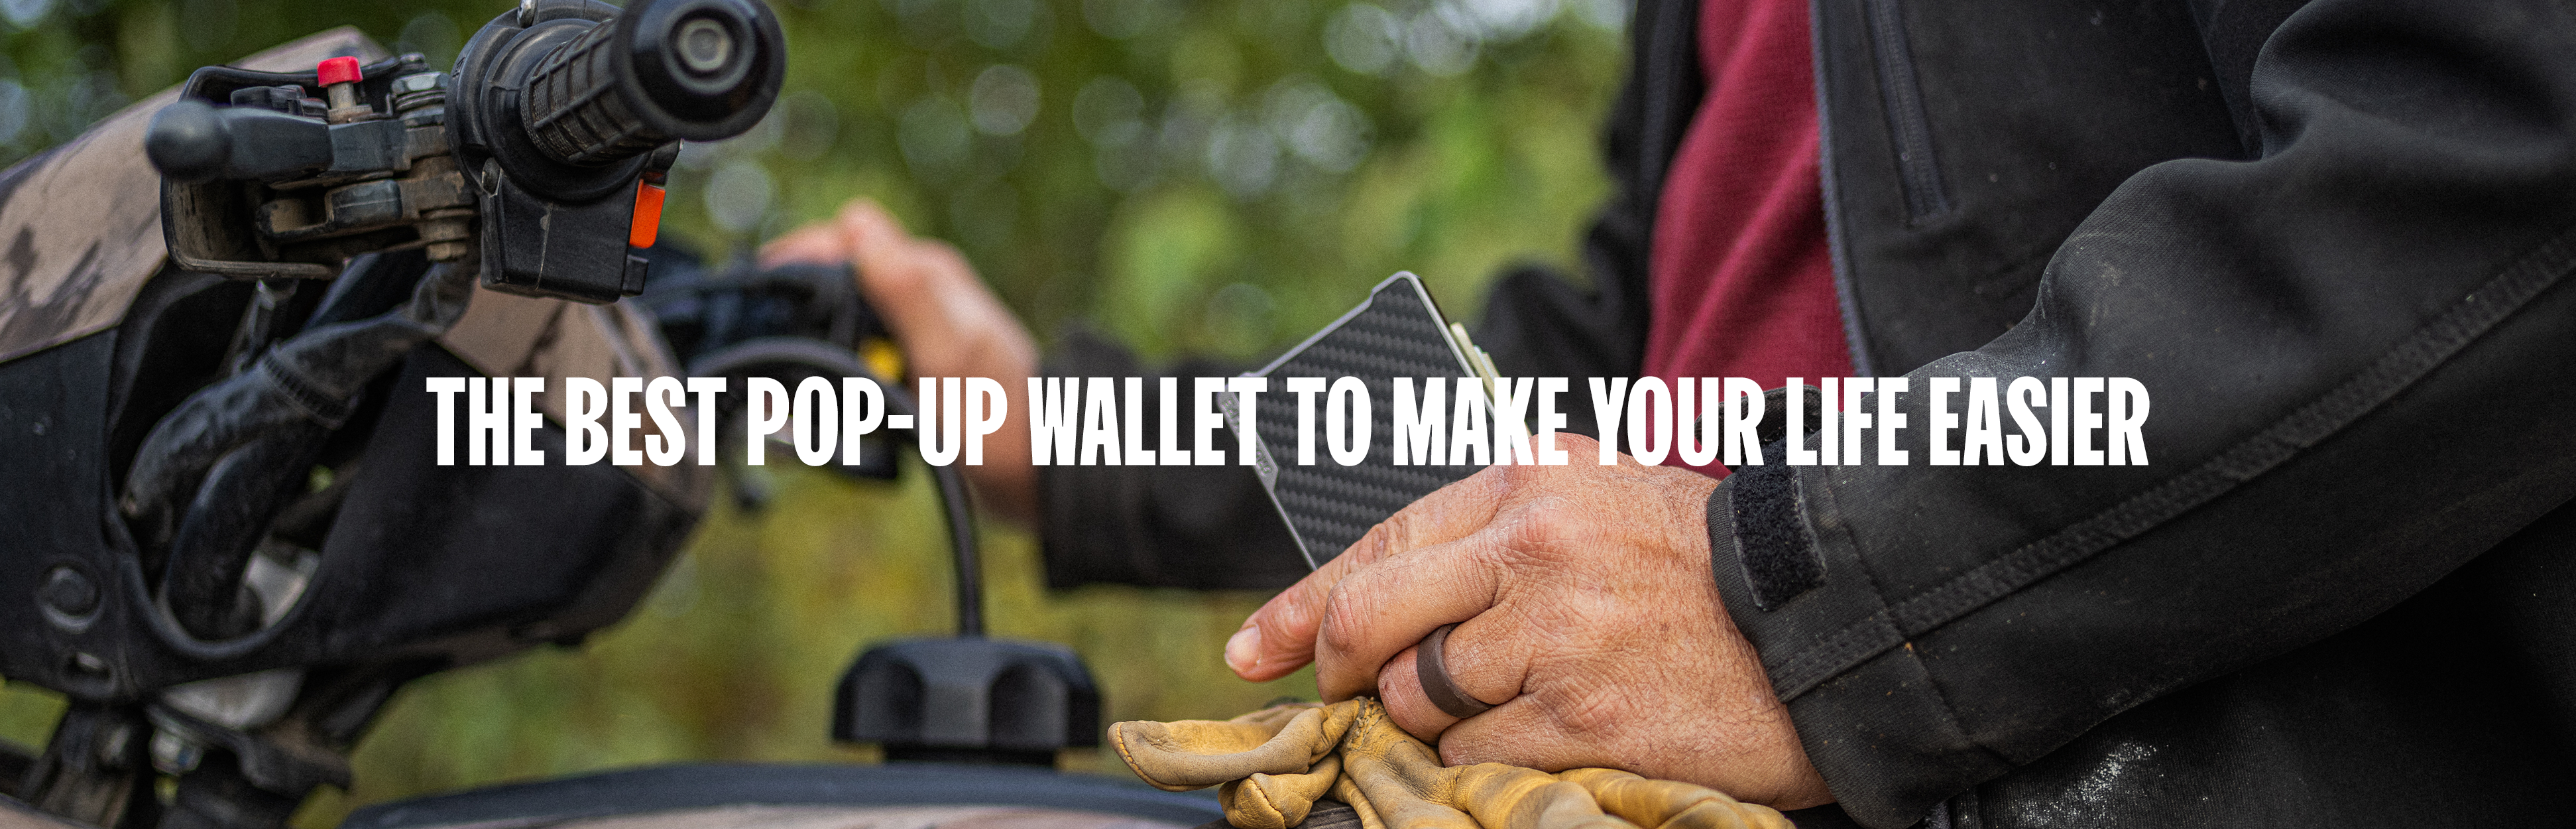 The Best Pop-Up Wallet to Make Your Life Easier